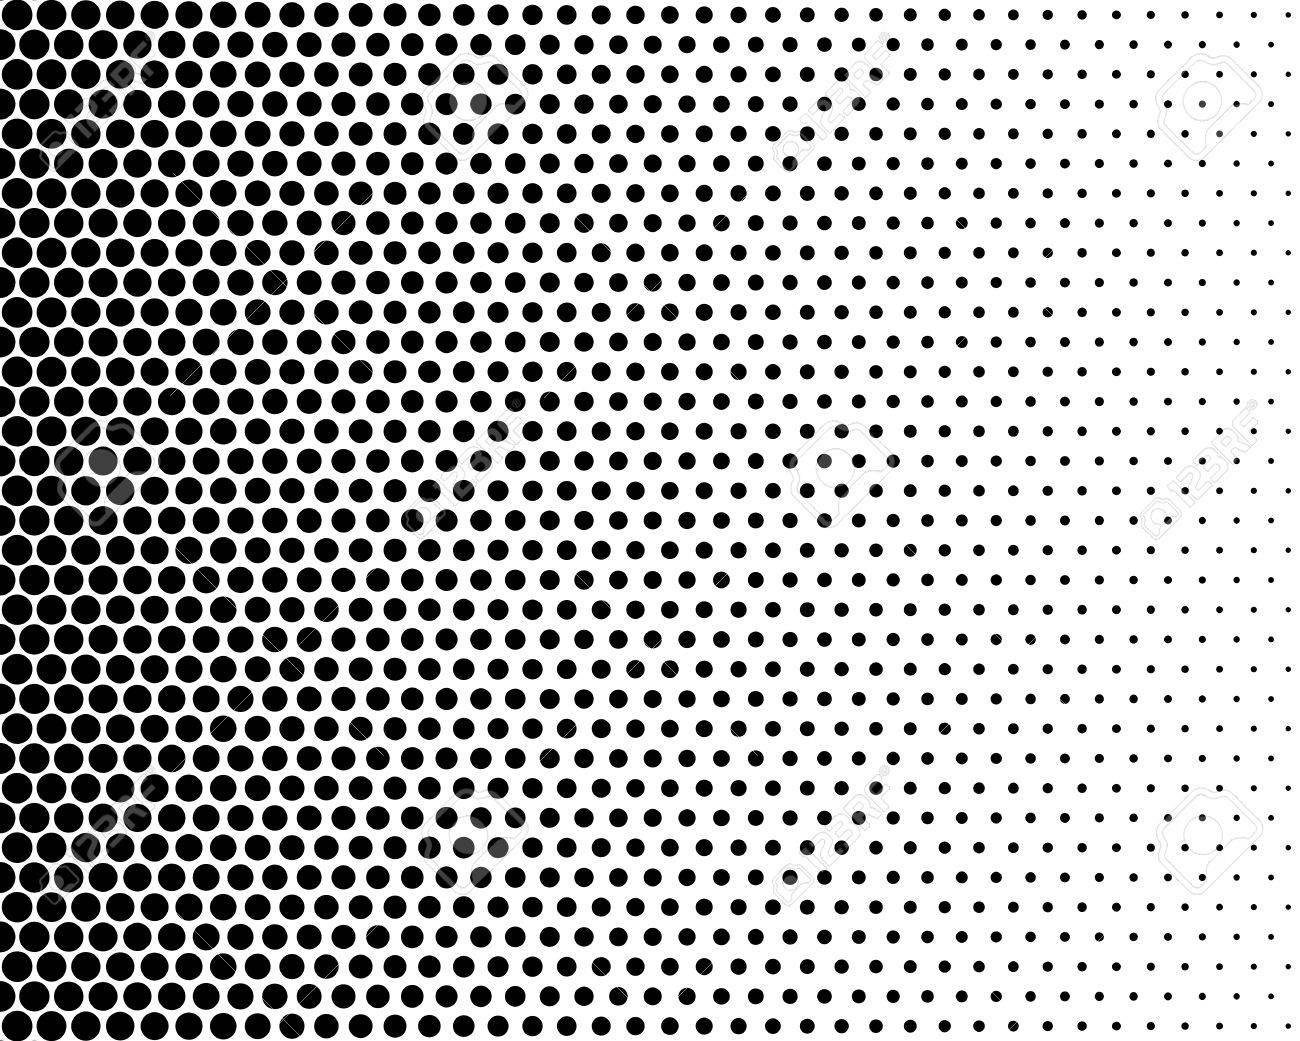 56441176-basic-halftone-dots-effect-in-black-and-white-color-halftone-effect-dot-halftone-black-white-halfton.jpg